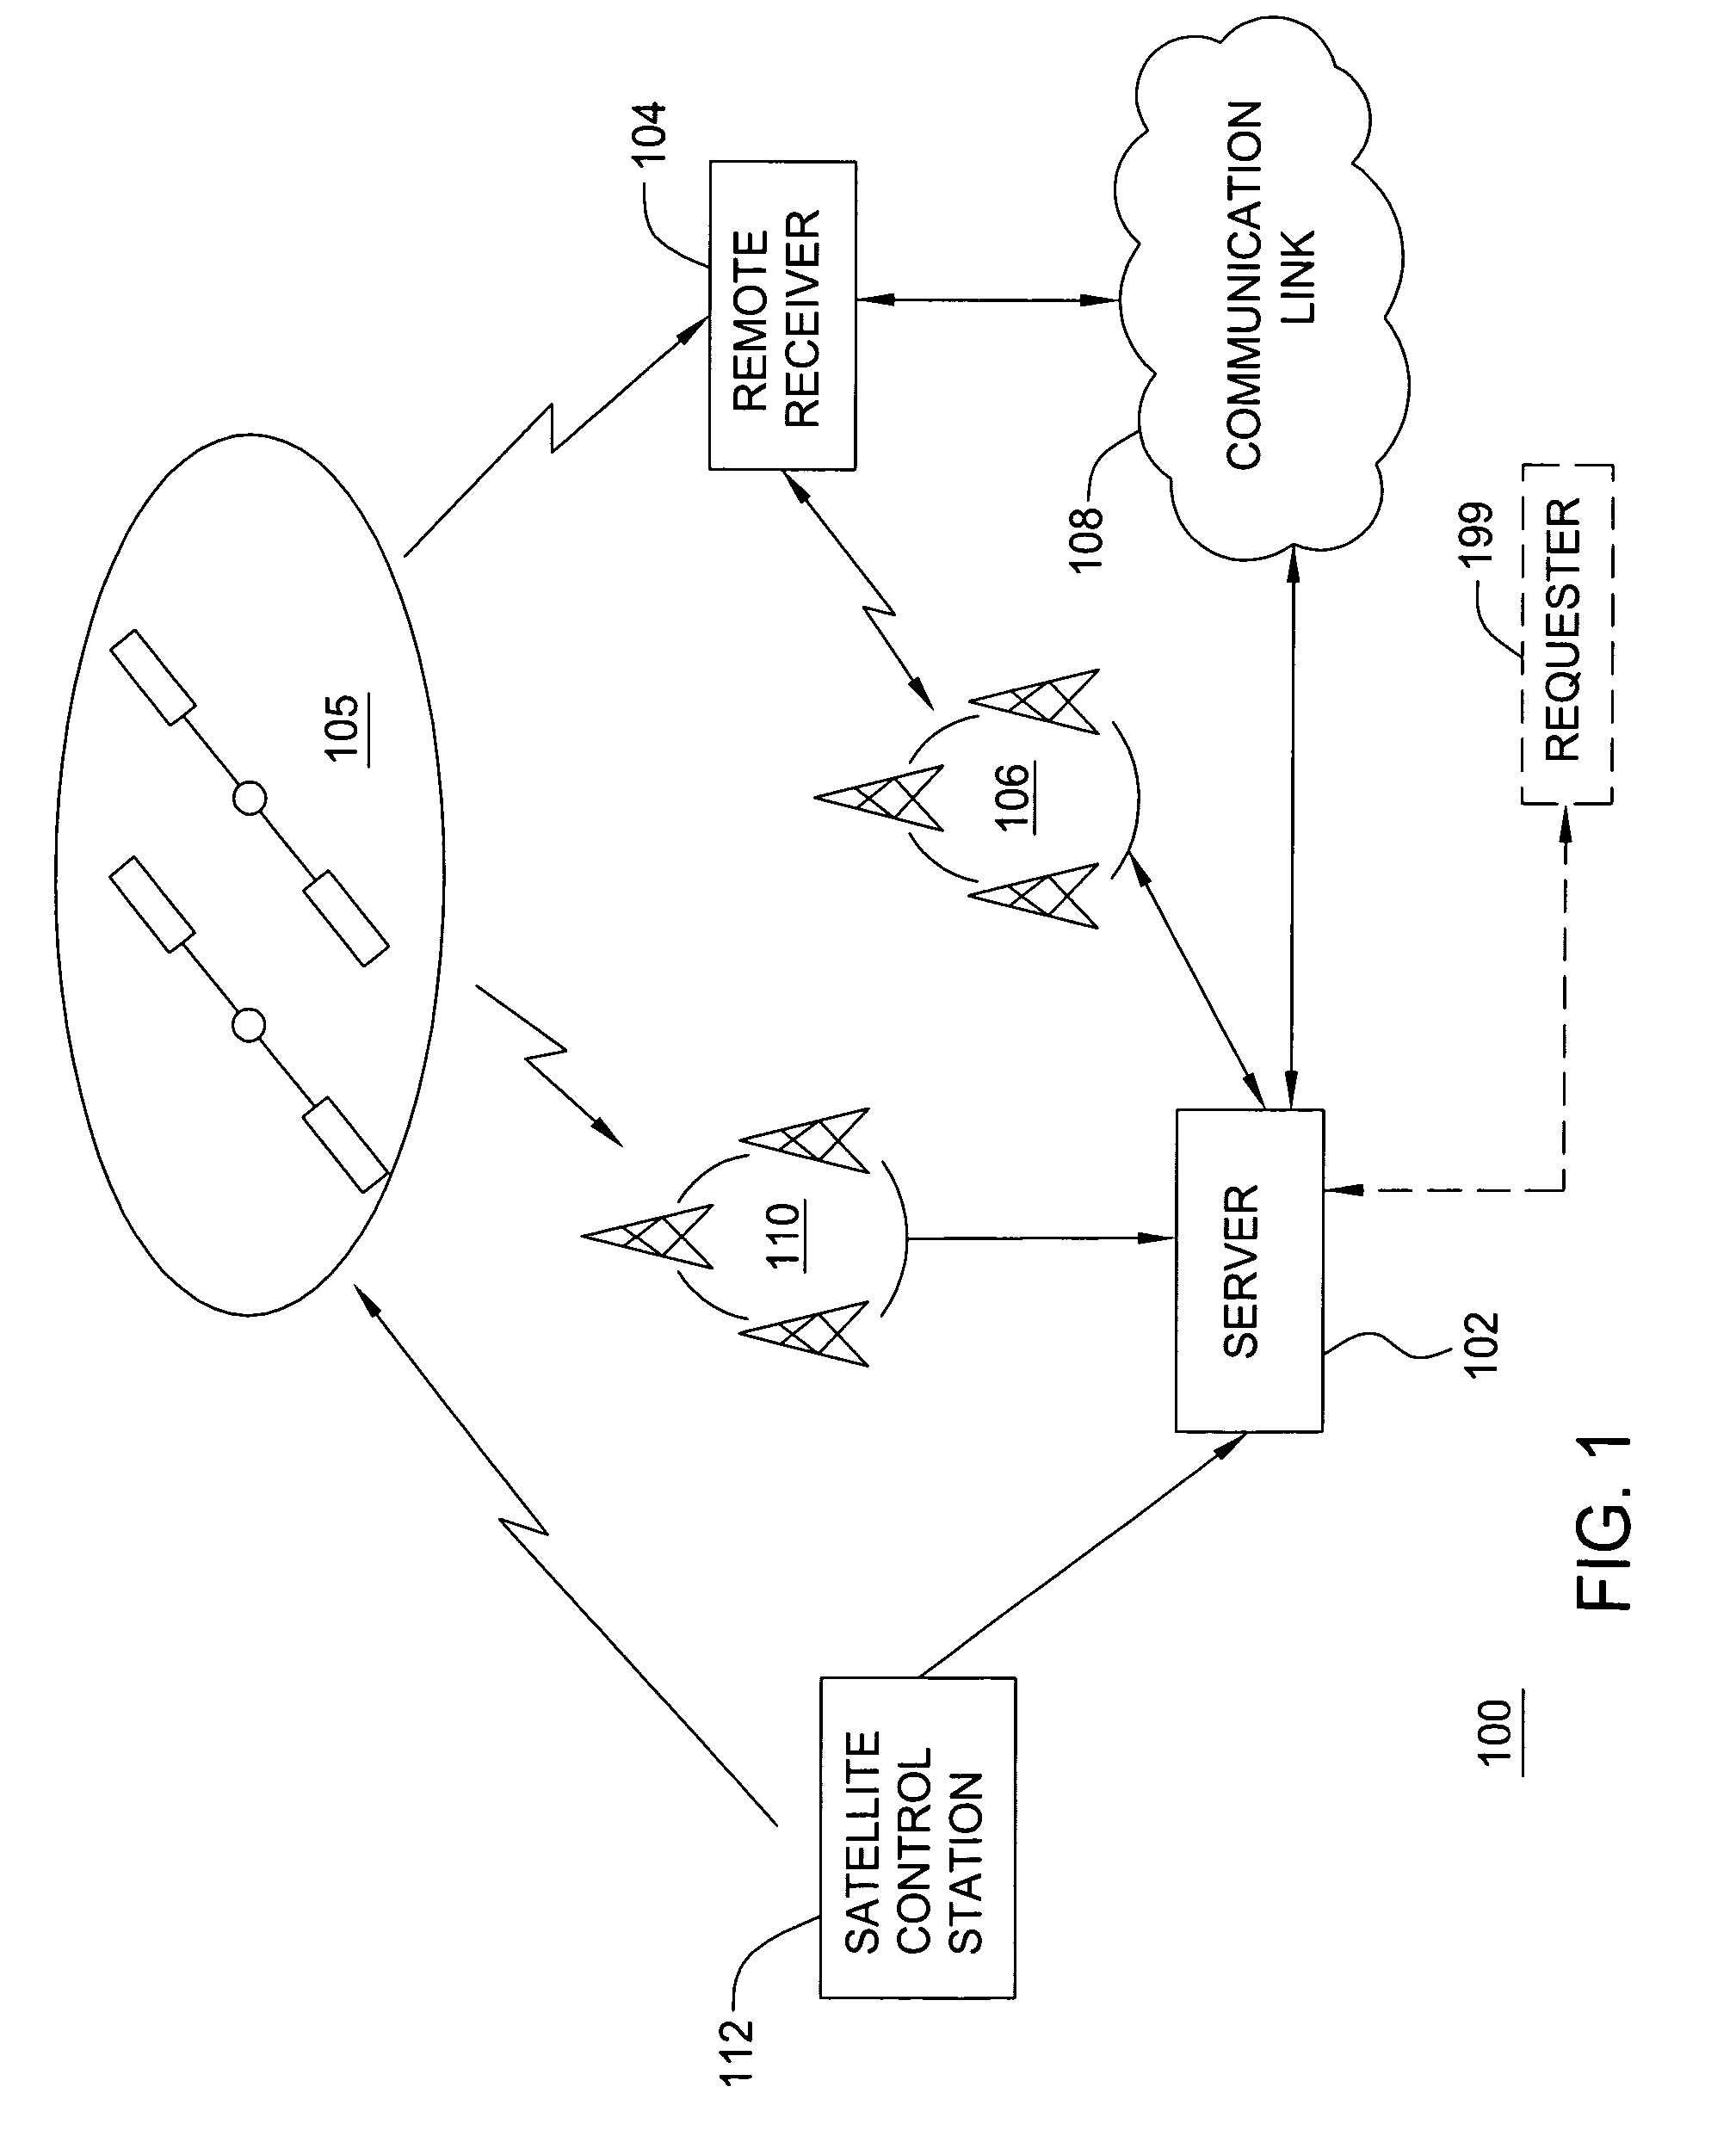 Method and apparatus for monitoring the integrity of satellite tracking data used by a remote receiver